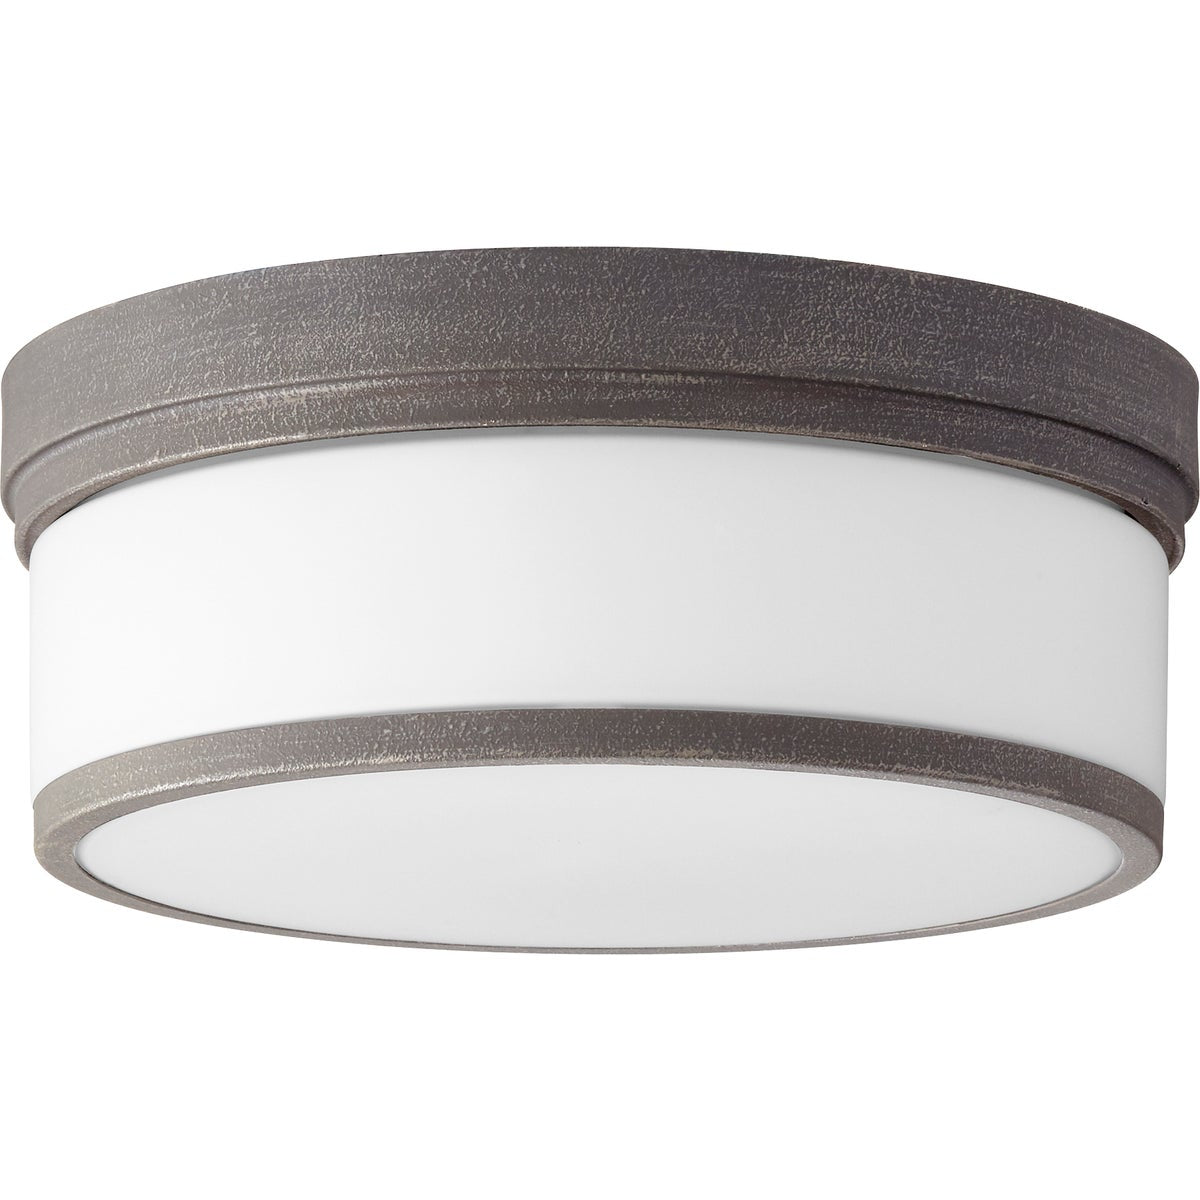 A modern flush mount light fixture with a white shade, adding futuristic luxury to any space. Brand: Quorum International. Wattage: 60W. Input Voltage: 120V. Number of Bulbs: 3. Bulbs Included: No. Bulb Base Type: Medium E26. Dimmable: Yes. Certifications: UL Listed. Safety Rating: Damp Location. Finish options: Aged Brass, Aged Silver Leaf, Noir, Oiled Bronze, Polished Nickel, Satin Nickel, Zinc. Dimensions: 14"W x 5.5"H. Warranty: 2 Years.